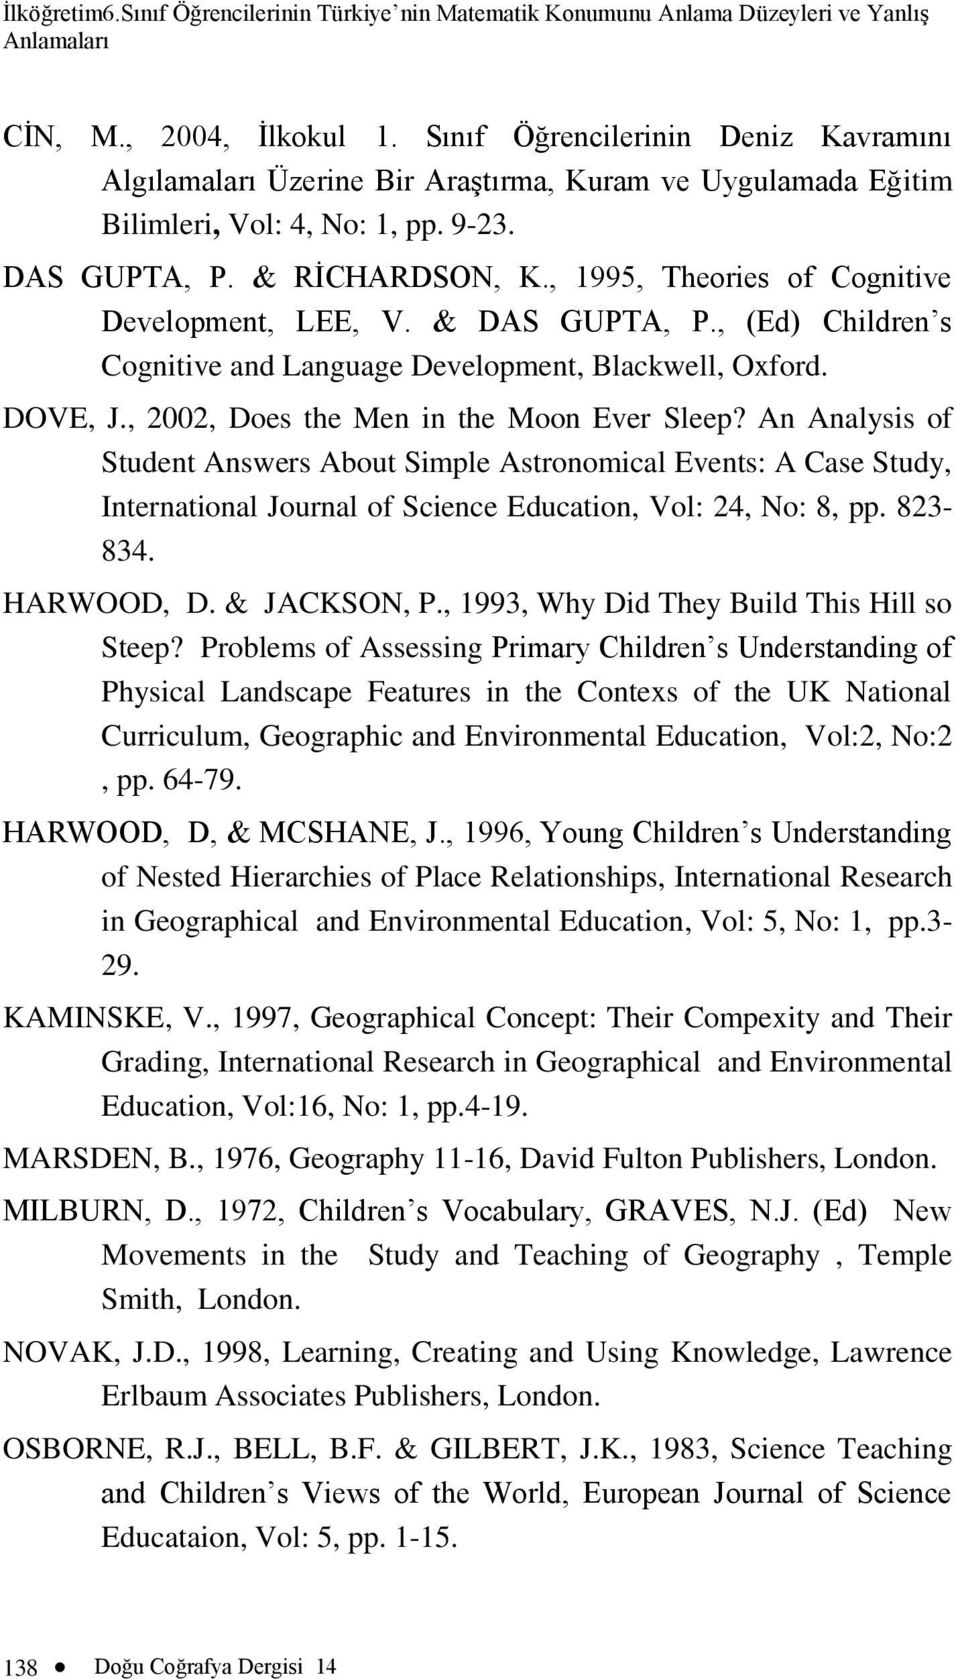 , 1995, Theories of Cognitive Development, LEE, V. & DAS GUPTA, P., (Ed) Children s Cognitive and Language Development, Blackwell, Oxford. DOVE, J., 2002, Does the Men in the Moon Ever Sleep?